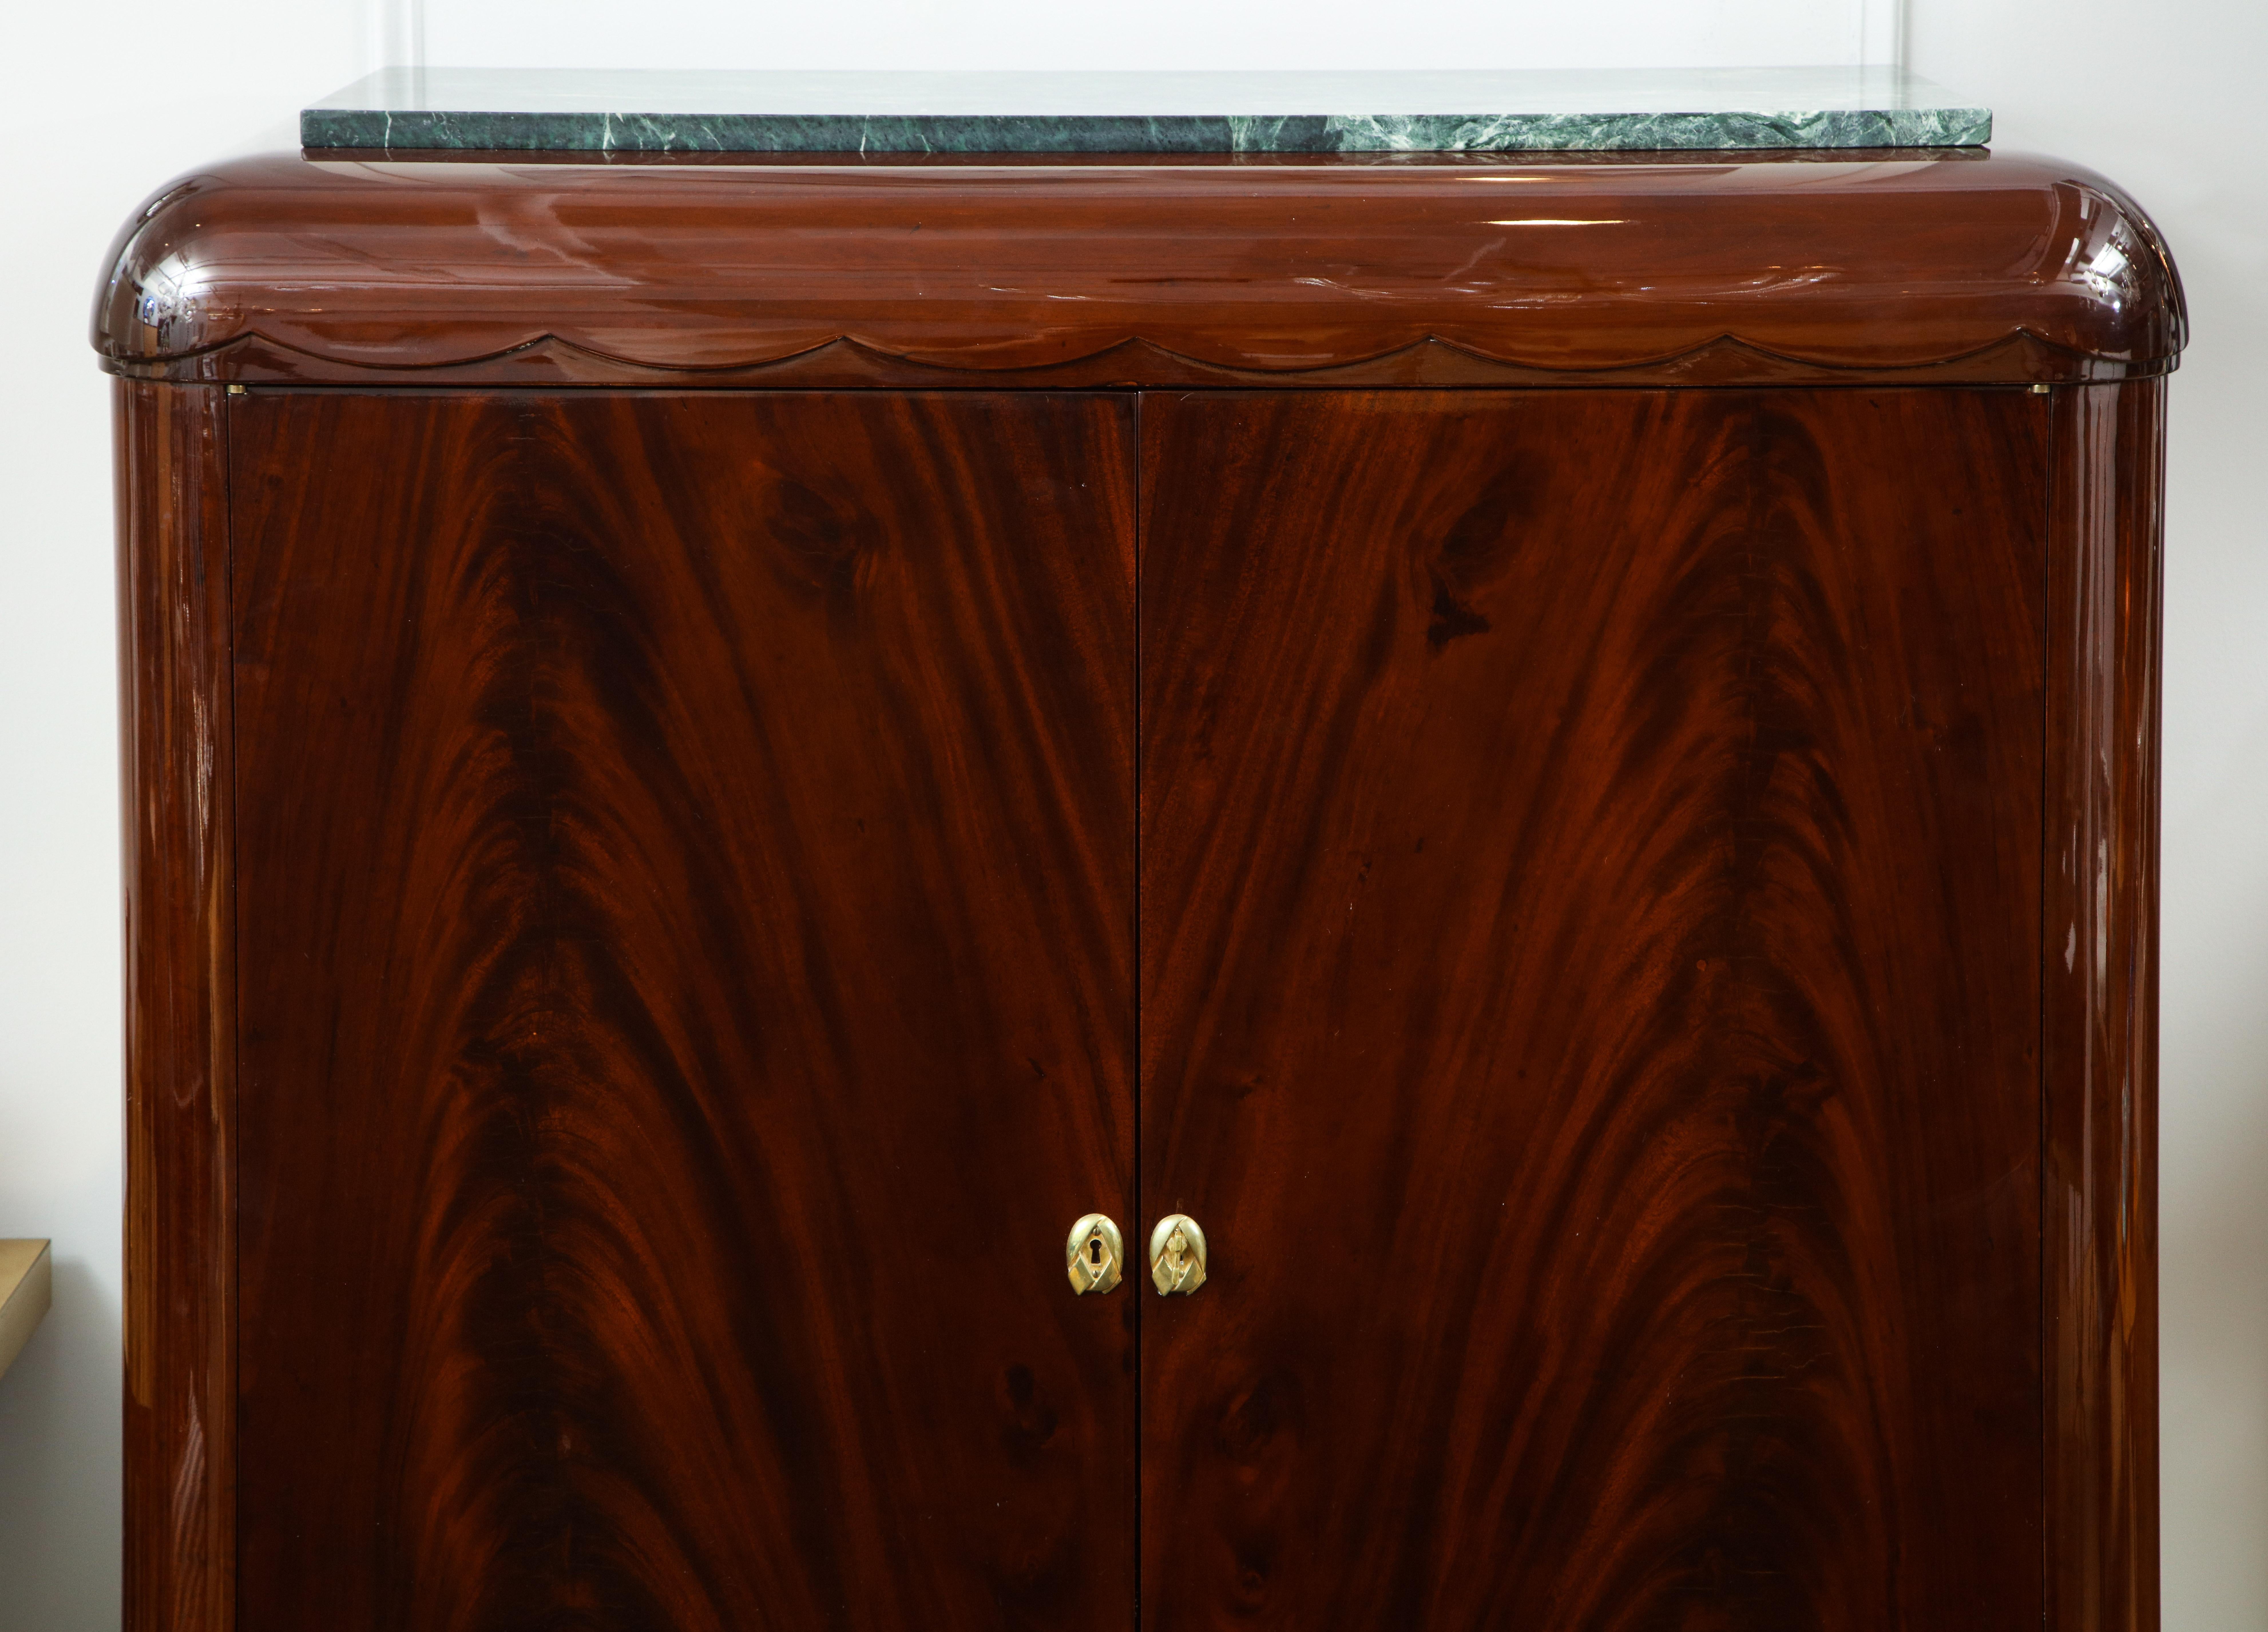 The later marble resting on a rounded scalloped mahogany top over 2 doors with bronze escutcheons. opening to a fitted interior, the whole supported by a rounded Greek key foot.
References can be found in 